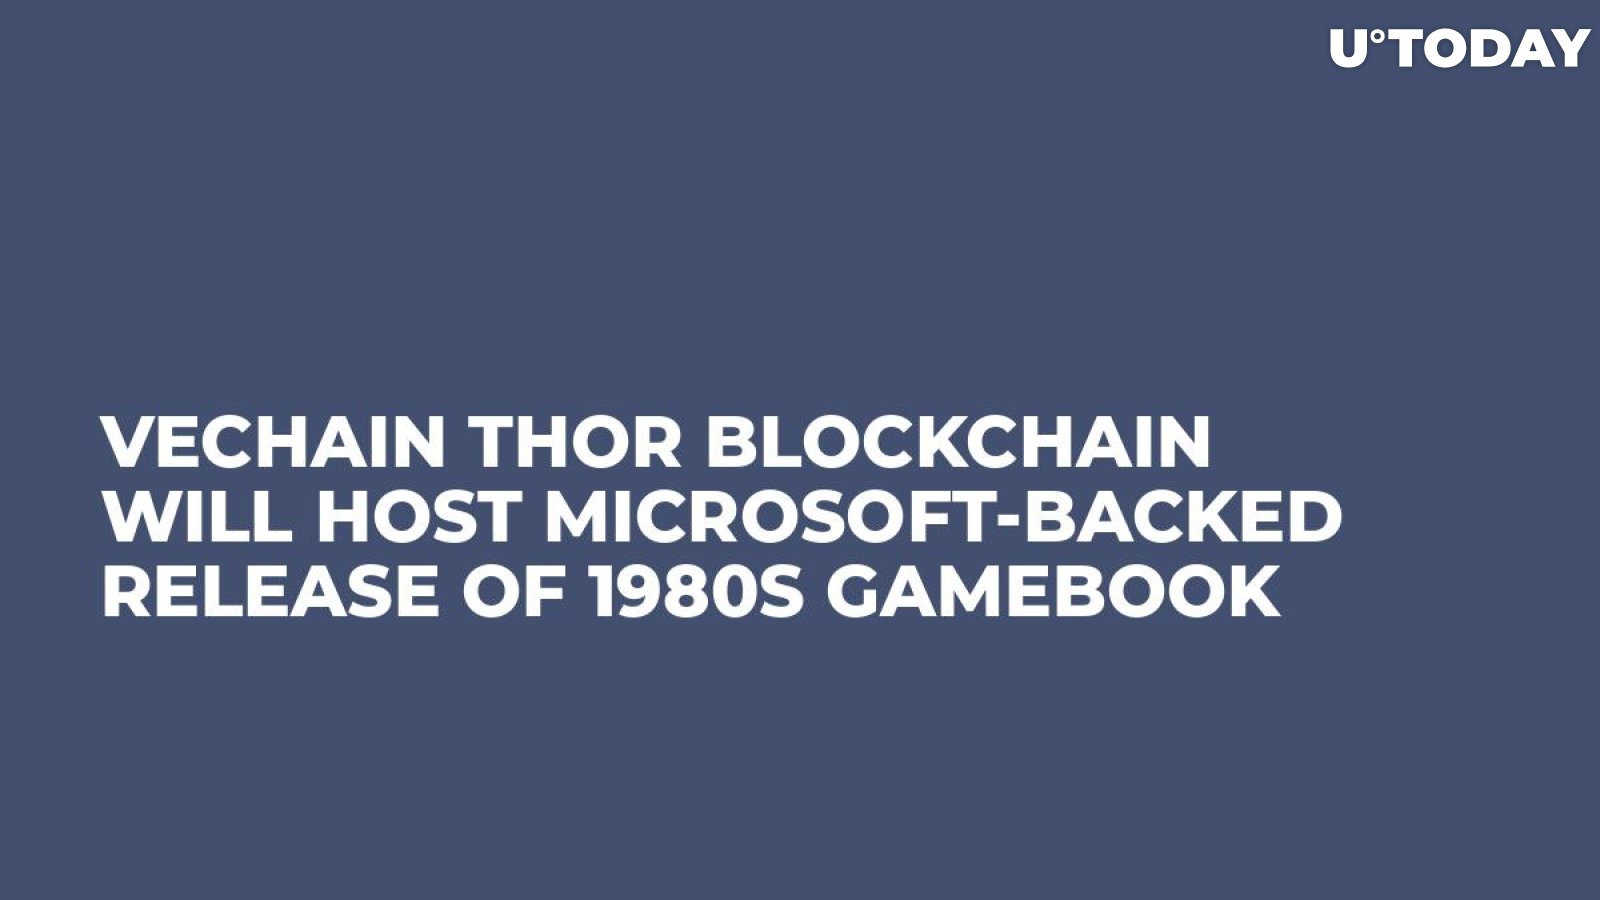 VeChain Thor Blockchain Will Host Microsoft-Backed Release of 1980s Gamebook